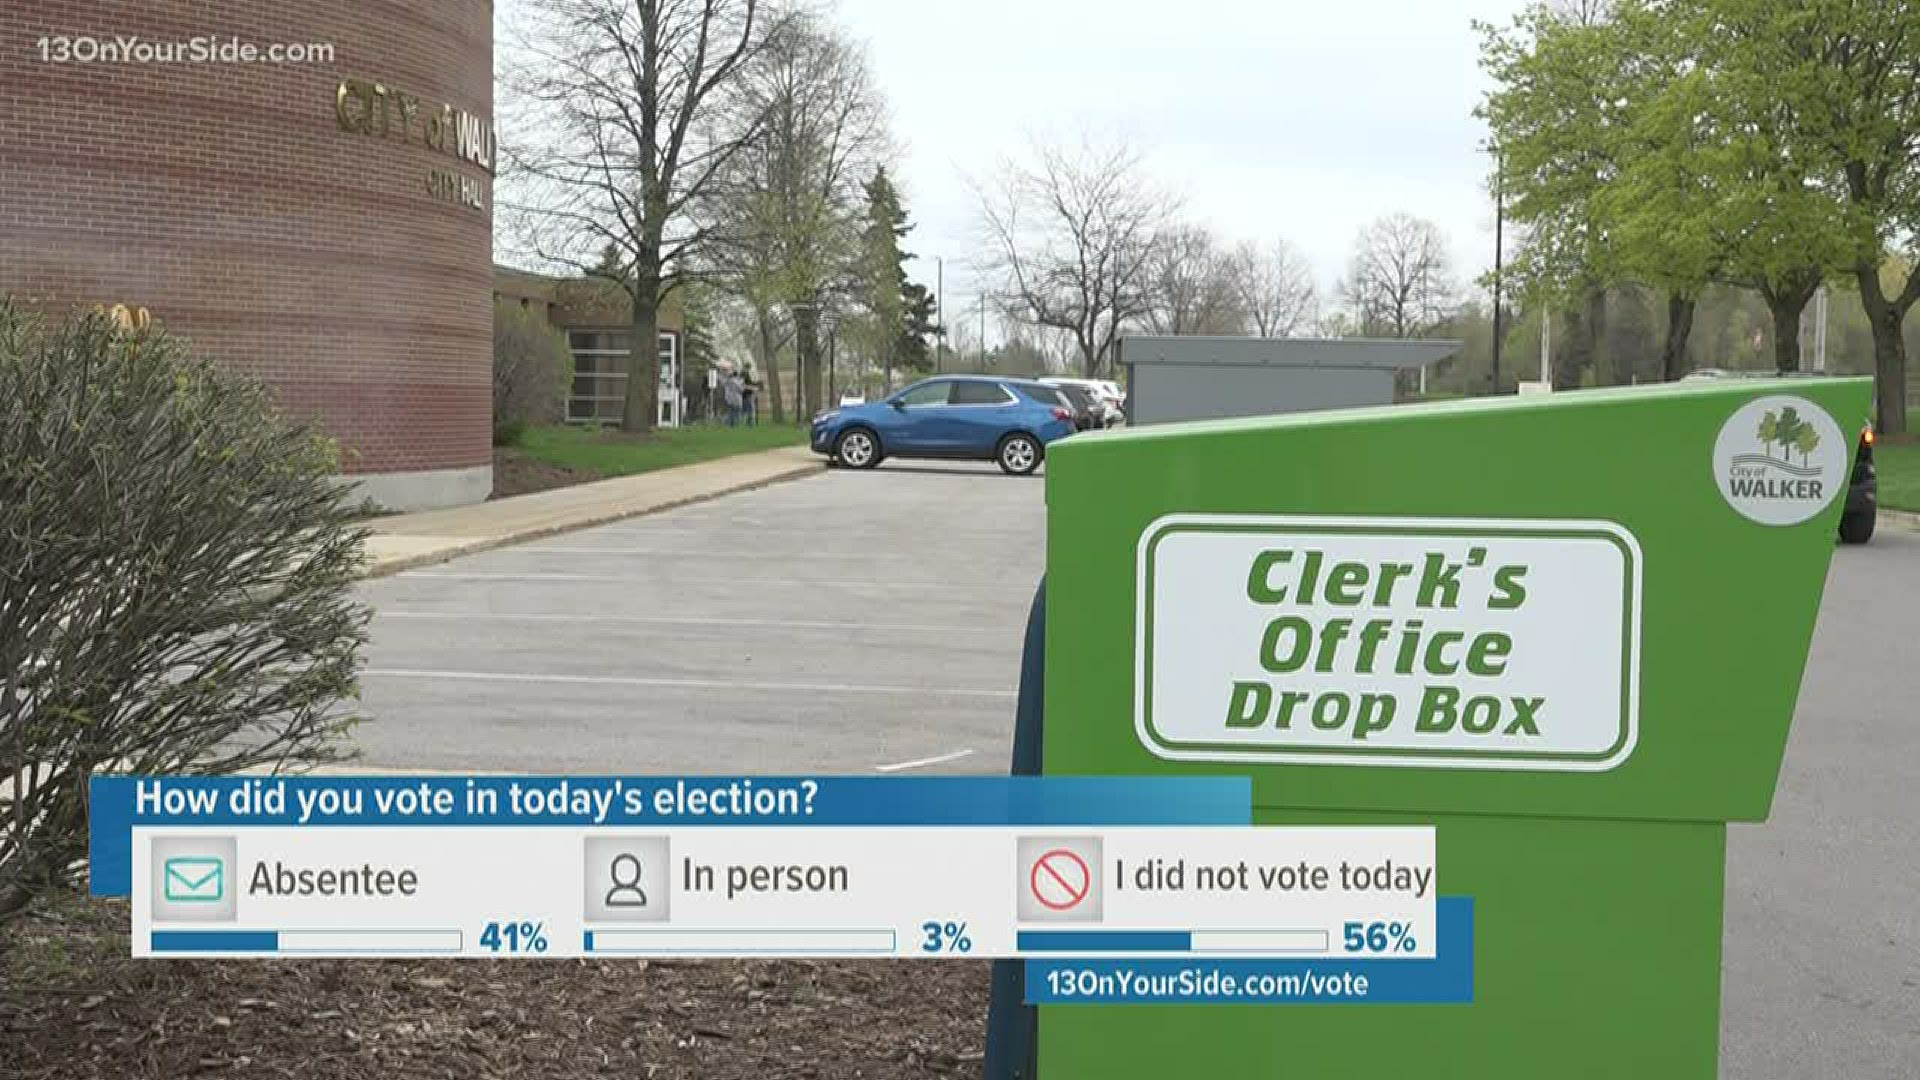 Tuesday's election was held primarily by mail, but many flocked to Walker City Hall to vote.